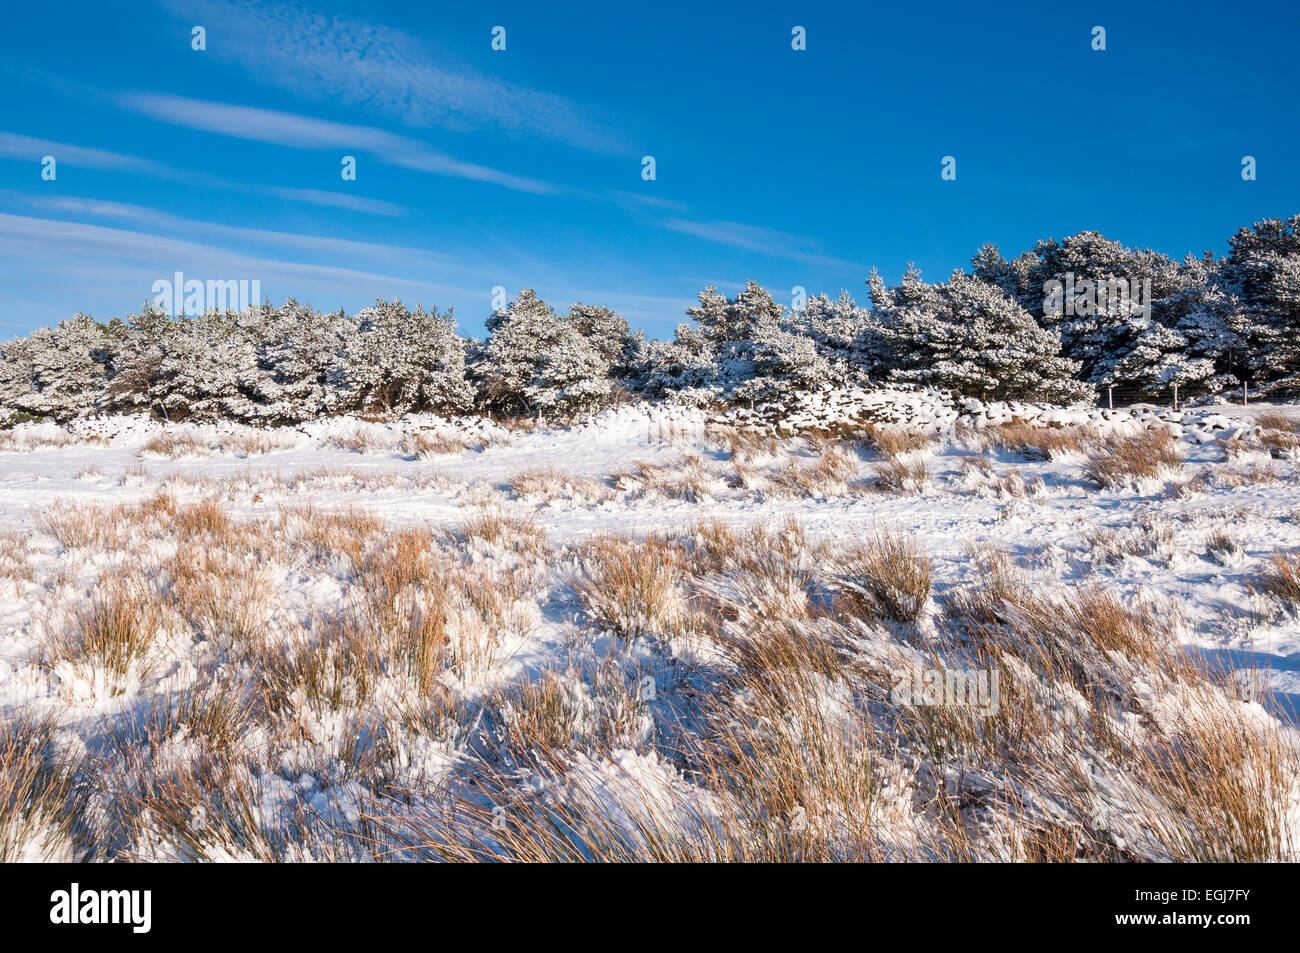 Snowy landscape on Coombes edge, Charlesworth, Derbyshire. Reeds push through the snow. Pine trees below a blue sky. Stock Photo